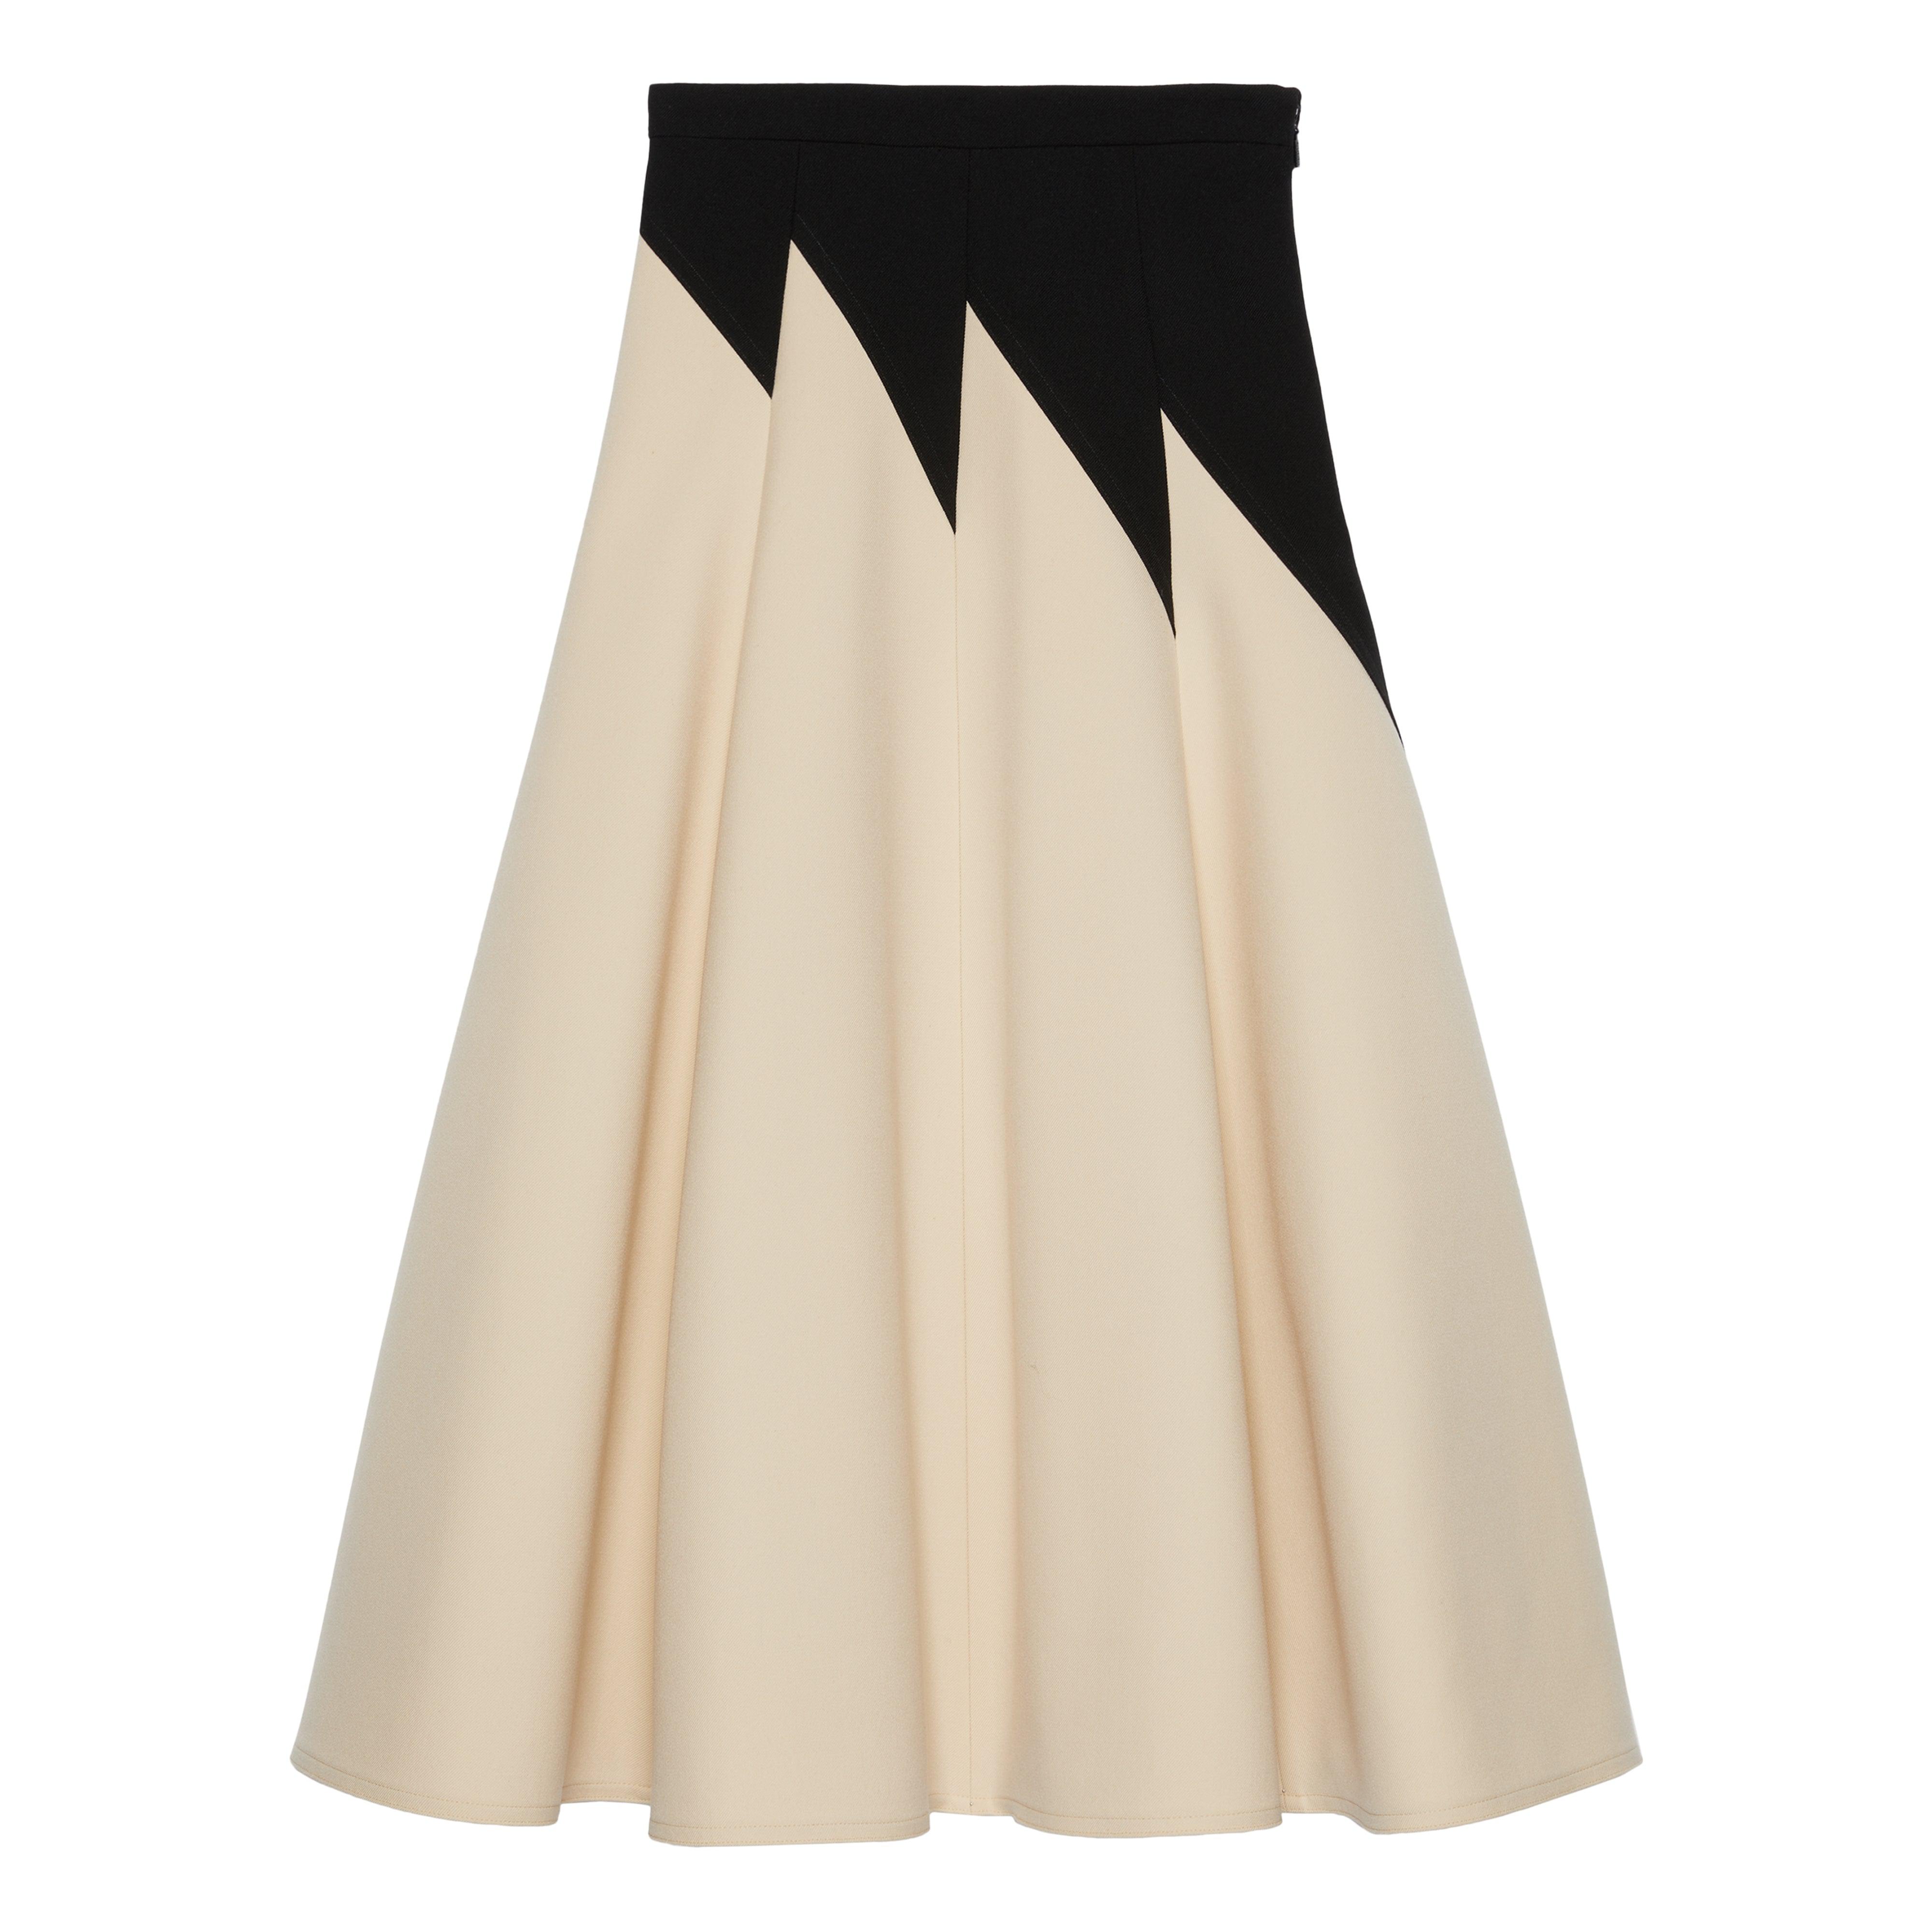 Gucci Women's DSM Exclusive Wool Cover Comfort Midi Skirt (Black/Ivory) by GUCCI